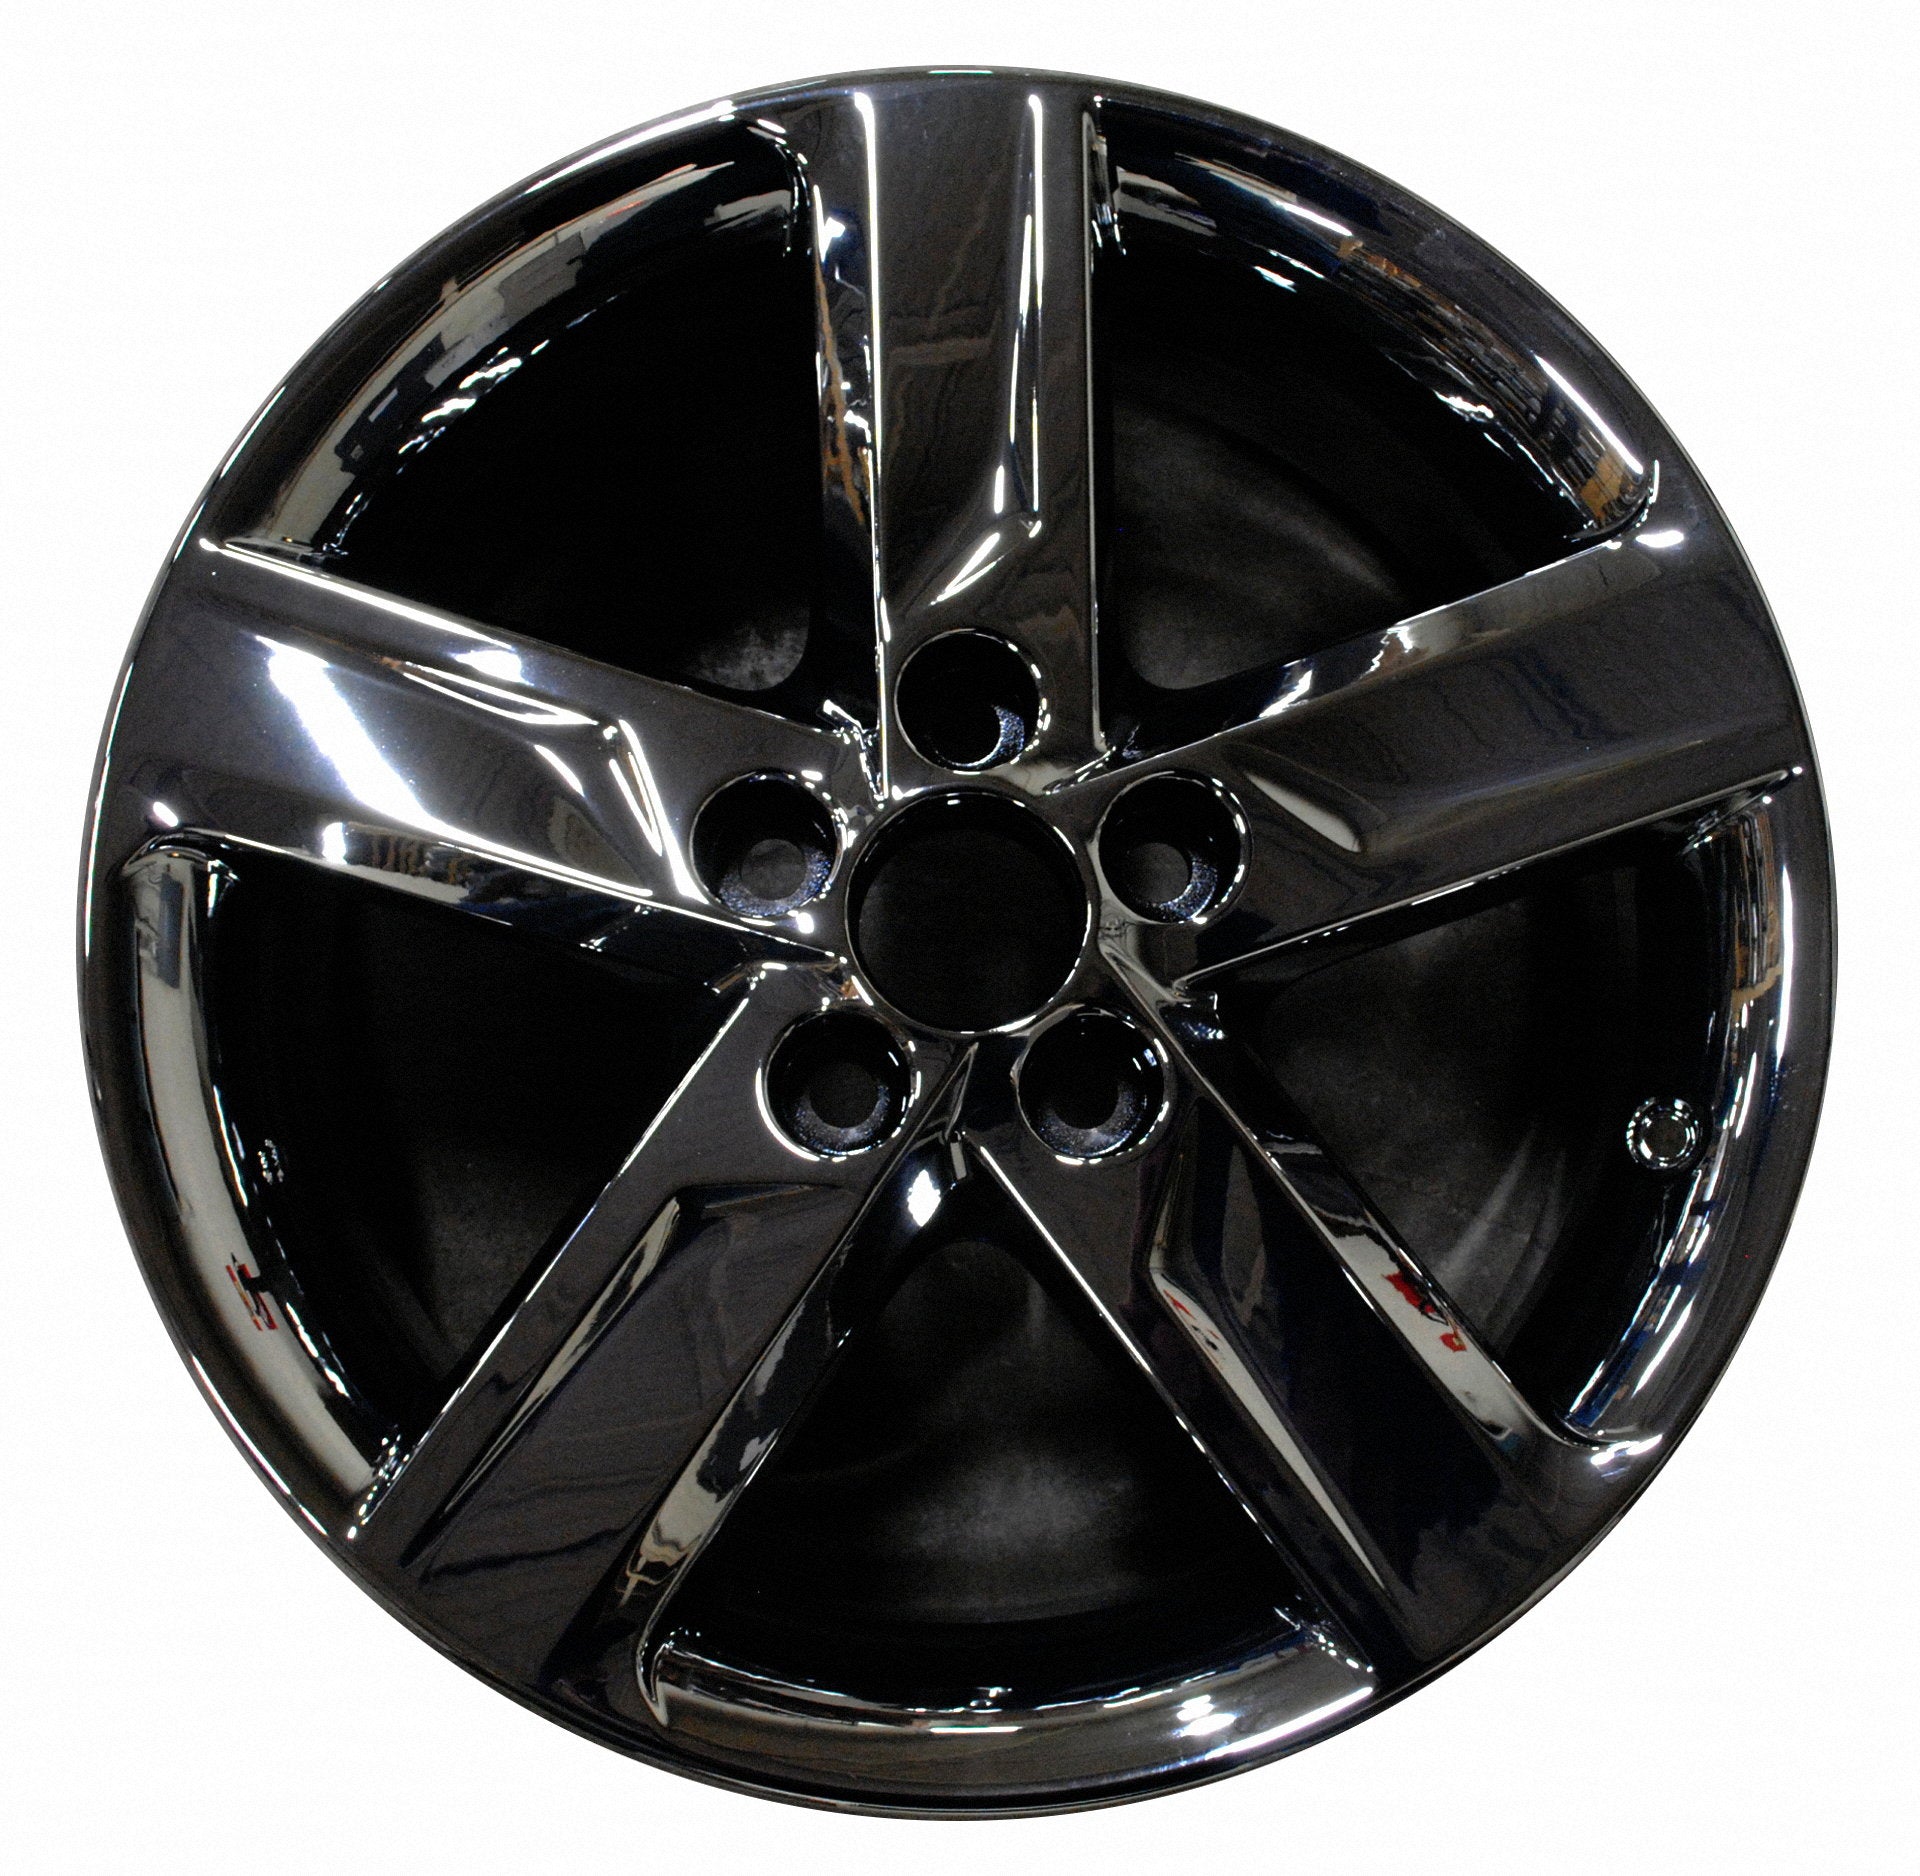 Toyota Camry  2009, 2010, 2011, 2012, 2013, 2014 Factory OEM Car Wheel Size 17x7 Alloy WAO.69604.PVD2.FF